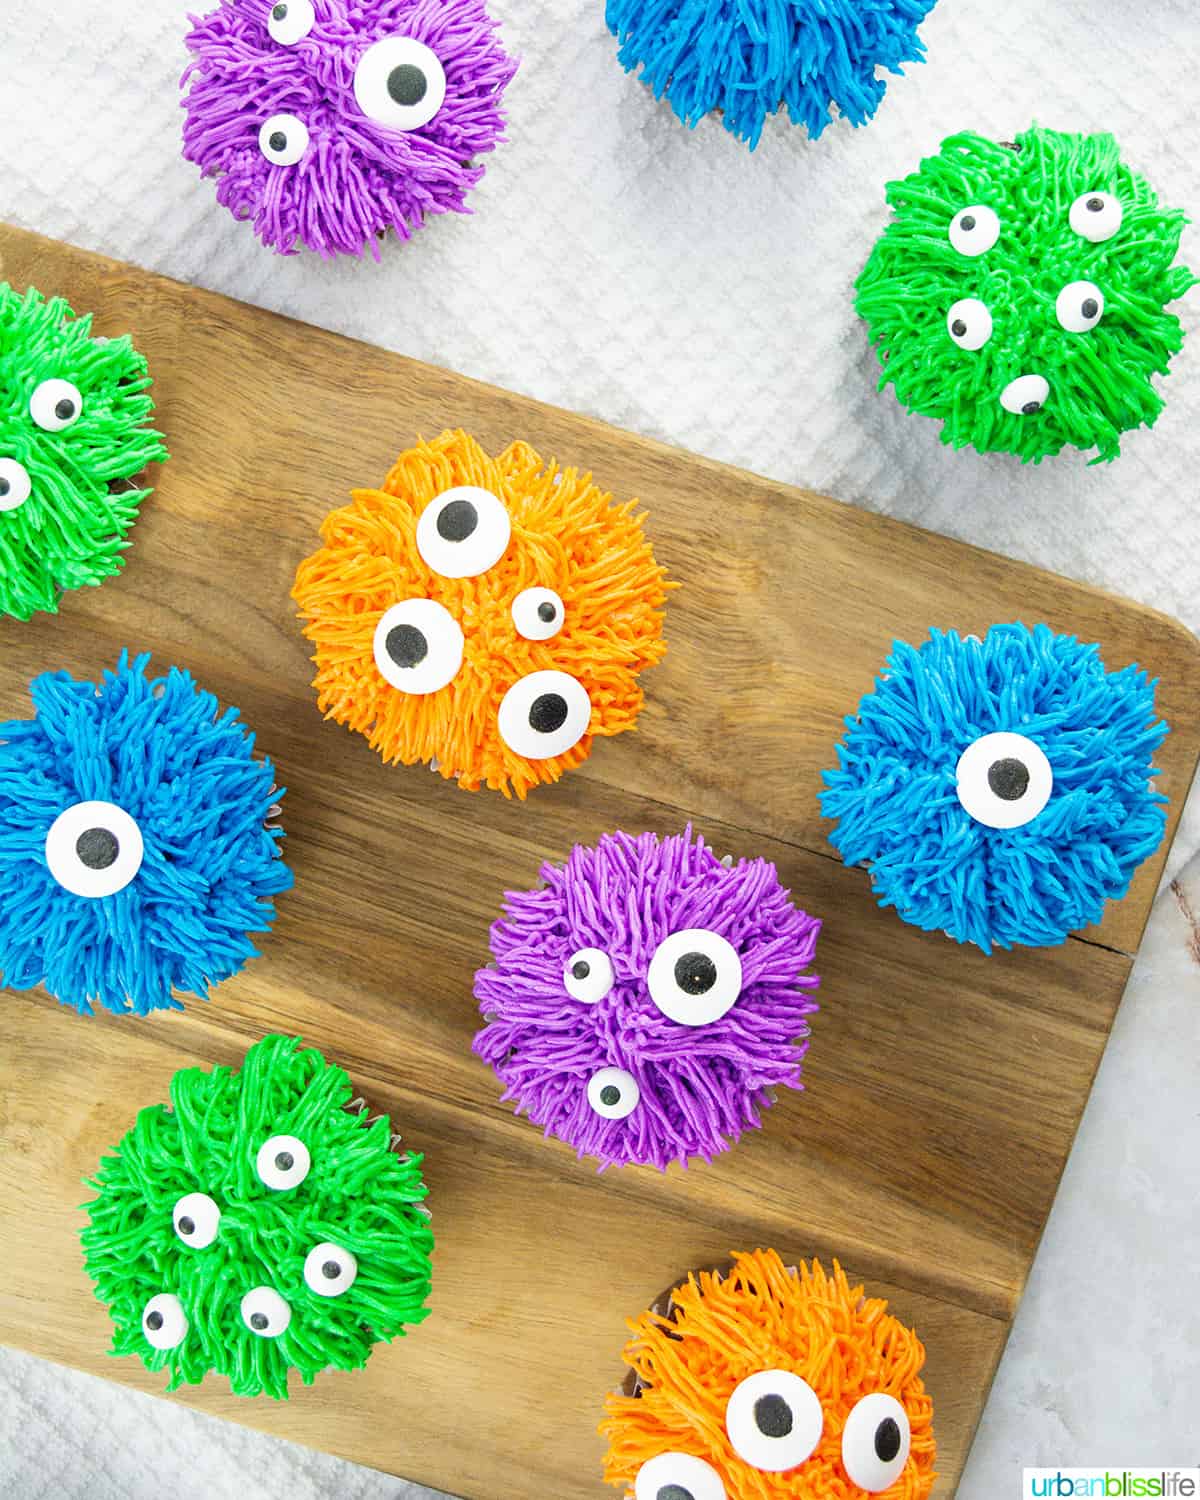 several colorful bright halloween monster cupcakes on a wood board.